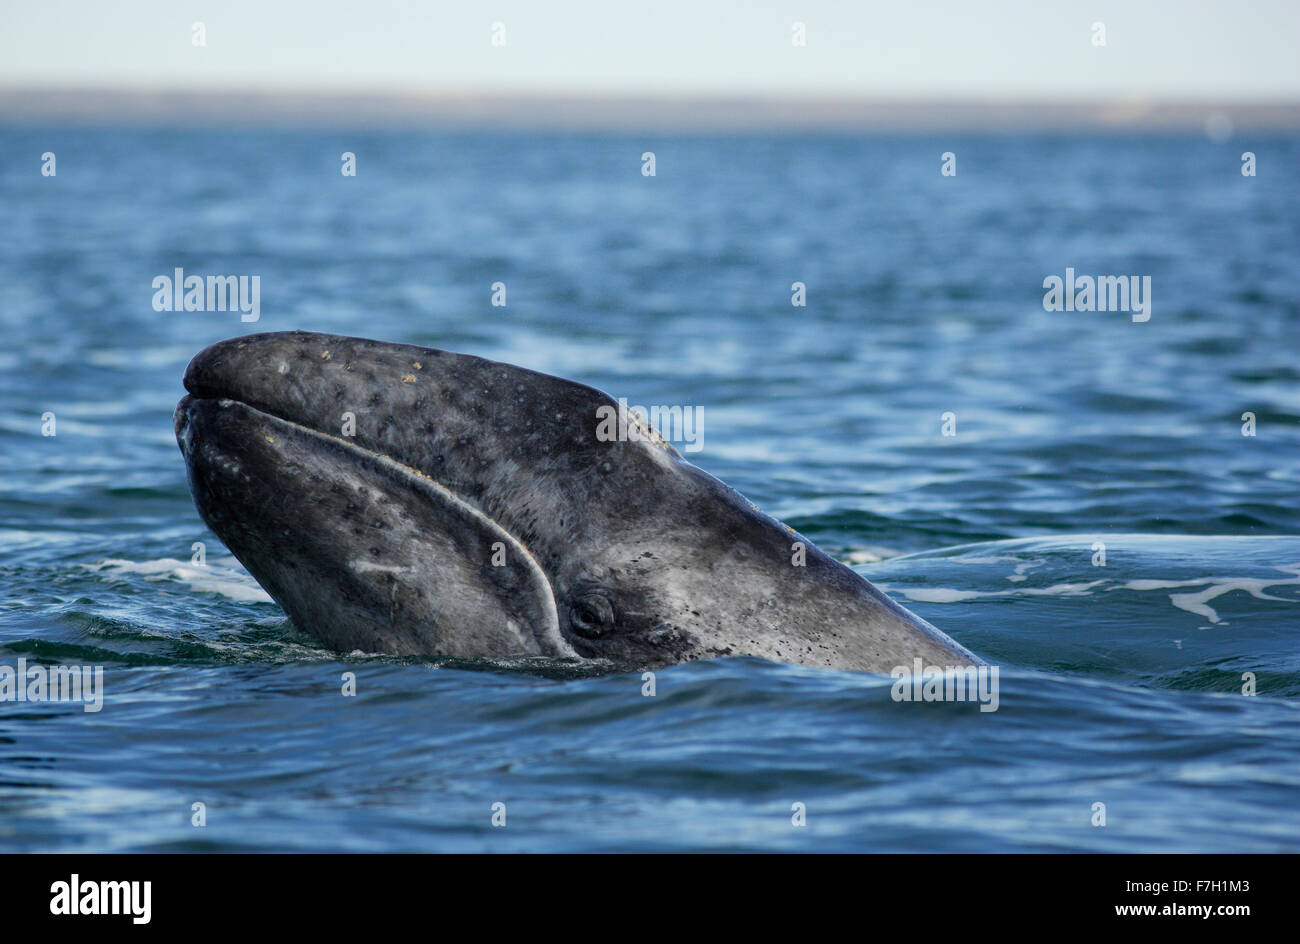 pr0162-D. Gray Whale (Eschrichtius robustus) calf. Baja, Mexico. Photo Copyright © Brandon Cole. All rights reserved worldwide. Stock Photo